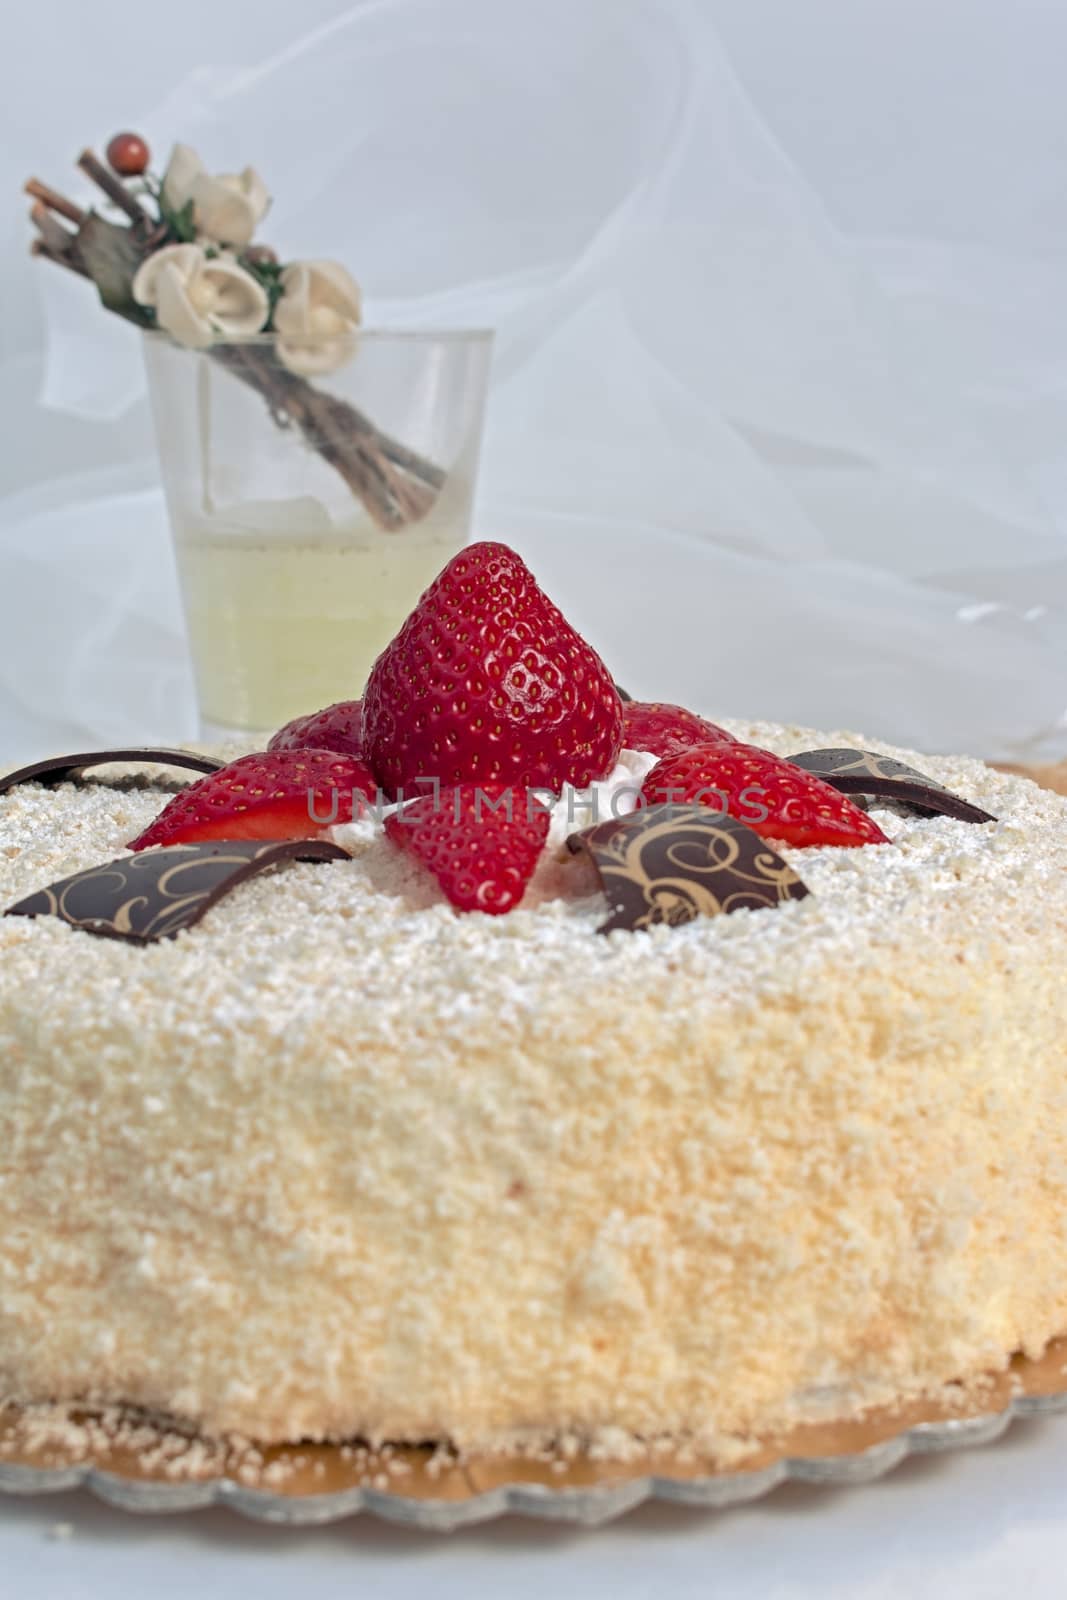 inviting cake with sponge cake and red strawberries